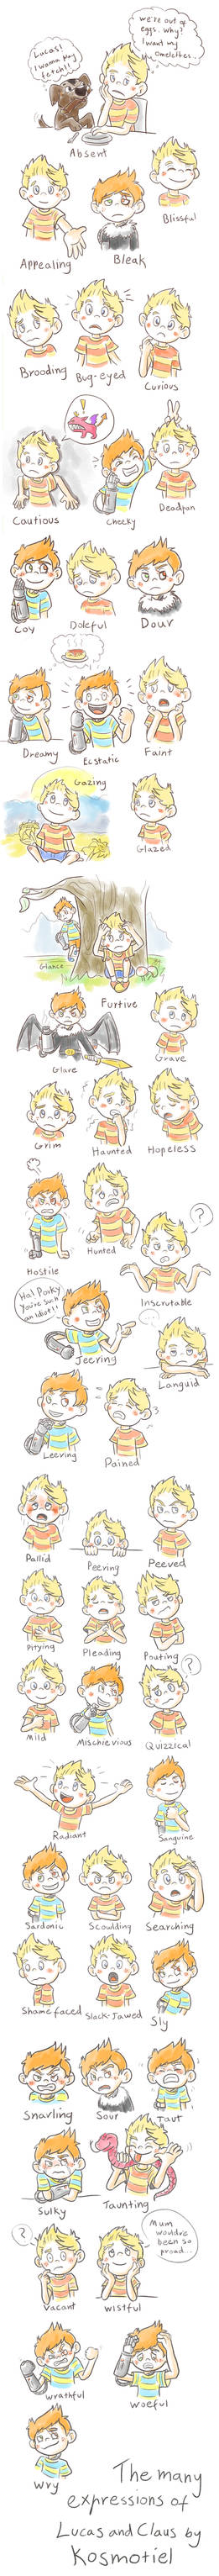 The many expressions of Lucas and Claus